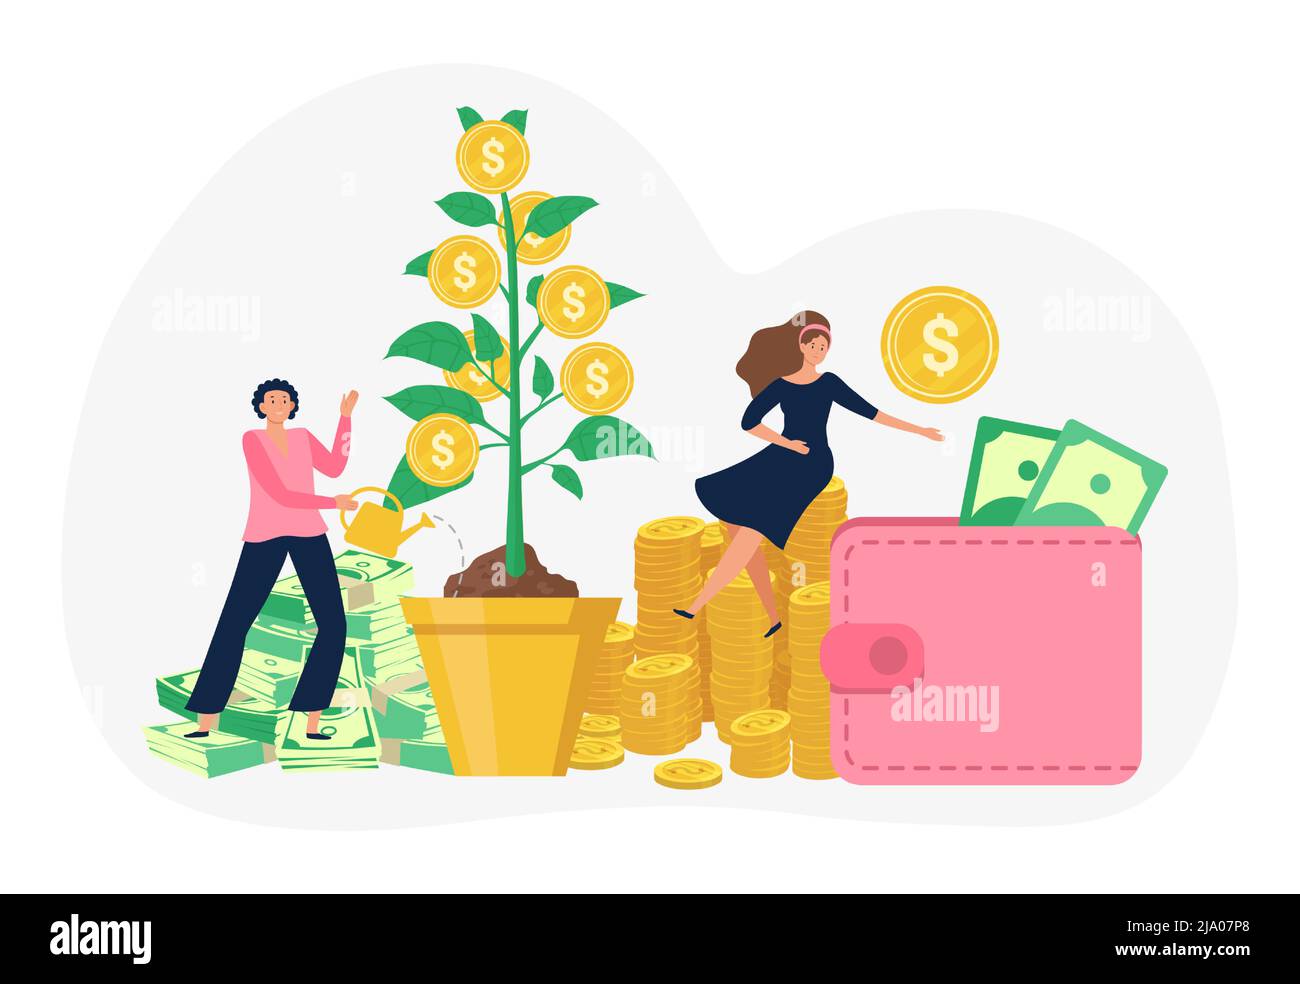 Money business investment, collect coins from tree Stock Vector